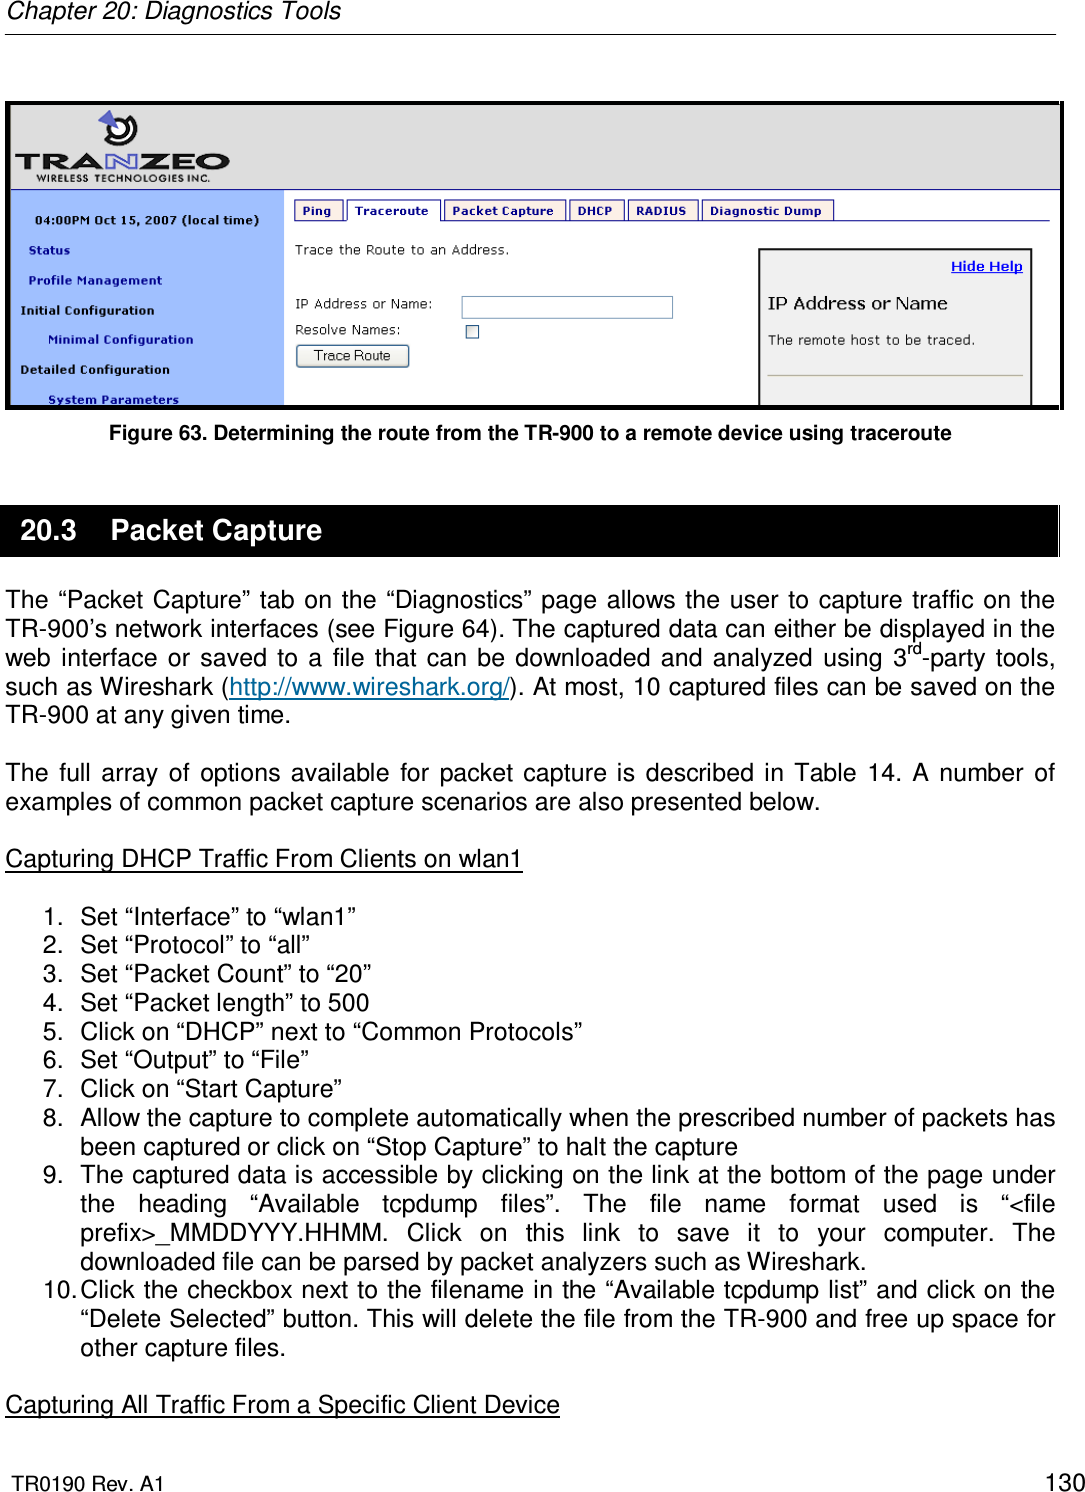 Chapter 20: Diagnostics Tools  TR0190 Rev. A1    130   Figure 63. Determining the route from the TR-900 to a remote device using traceroute 20.3  Packet Capture The “Packet Capture” tab on the “Diagnostics” page allows the user to capture traffic on the TR-900’s network interfaces (see Figure 64). The captured data can either be displayed in the web  interface  or  saved  to a  file  that  can  be  downloaded  and  analyzed  using  3rd-party  tools, such as Wireshark (http://www.wireshark.org/). At most, 10 captured files can be saved on the TR-900 at any given time.  The  full  array  of  options  available  for  packet  capture  is  described  in  Table  14.  A  number  of examples of common packet capture scenarios are also presented below.  Capturing DHCP Traffic From Clients on wlan1  1.  Set “Interface” to “wlan1” 2.  Set “Protocol” to “all” 3.  Set “Packet Count” to “20” 4.  Set “Packet length” to 500 5.  Click on “DHCP” next to “Common Protocols” 6.  Set “Output” to “File” 7.  Click on “Start Capture” 8.  Allow the capture to complete automatically when the prescribed number of packets has been captured or click on “Stop Capture” to halt the capture 9.  The captured data is accessible by clicking on the link at the bottom of the page under the  heading  “Available  tcpdump  files”.  The  file  name  format  used  is  “&lt;file prefix&gt;_MMDDYYY.HHMM.  Click  on  this  link  to  save  it  to  your  computer.  The downloaded file can be parsed by packet analyzers such as Wireshark. 10. Click the checkbox next to the filename in the “Available tcpdump list” and click on the “Delete Selected” button. This will delete the file from the TR-900 and free up space for other capture files.  Capturing All Traffic From a Specific Client Device 